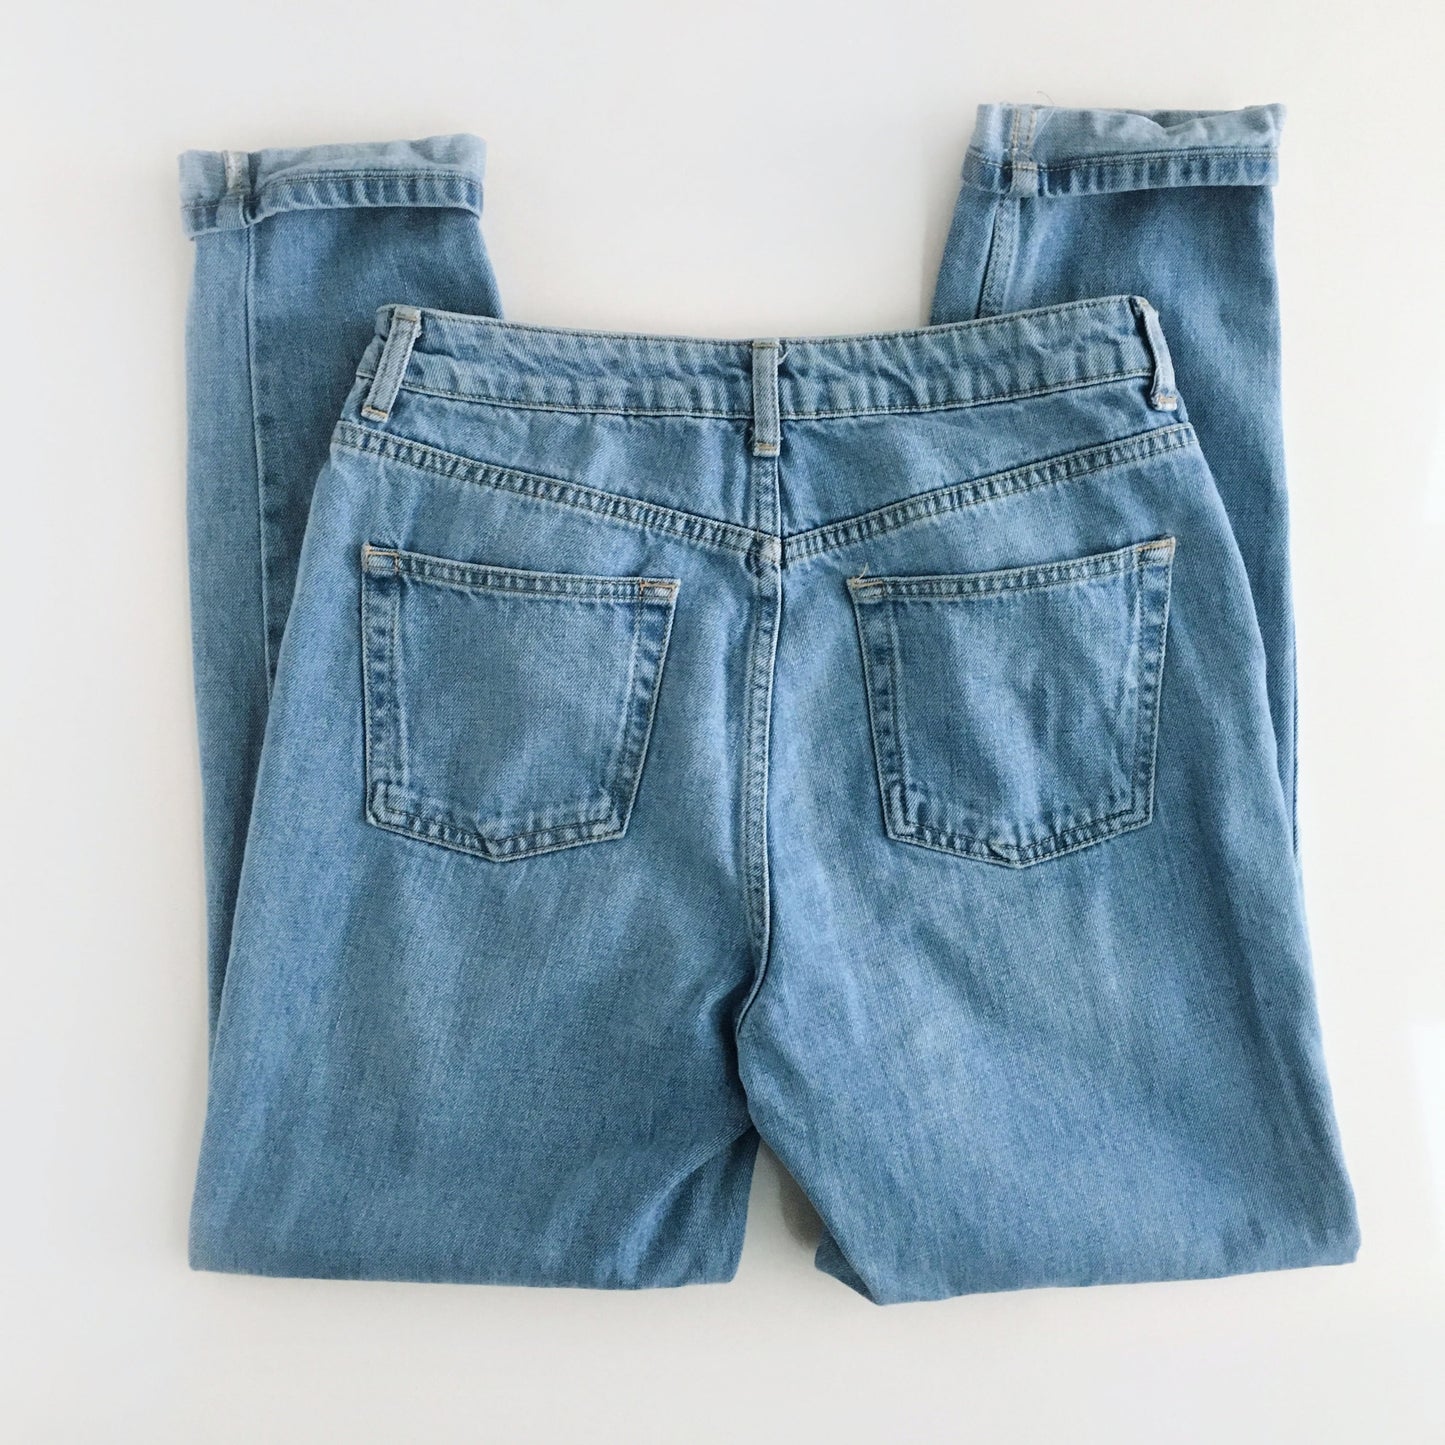 Topshop Moto Mom Jeans - size 30